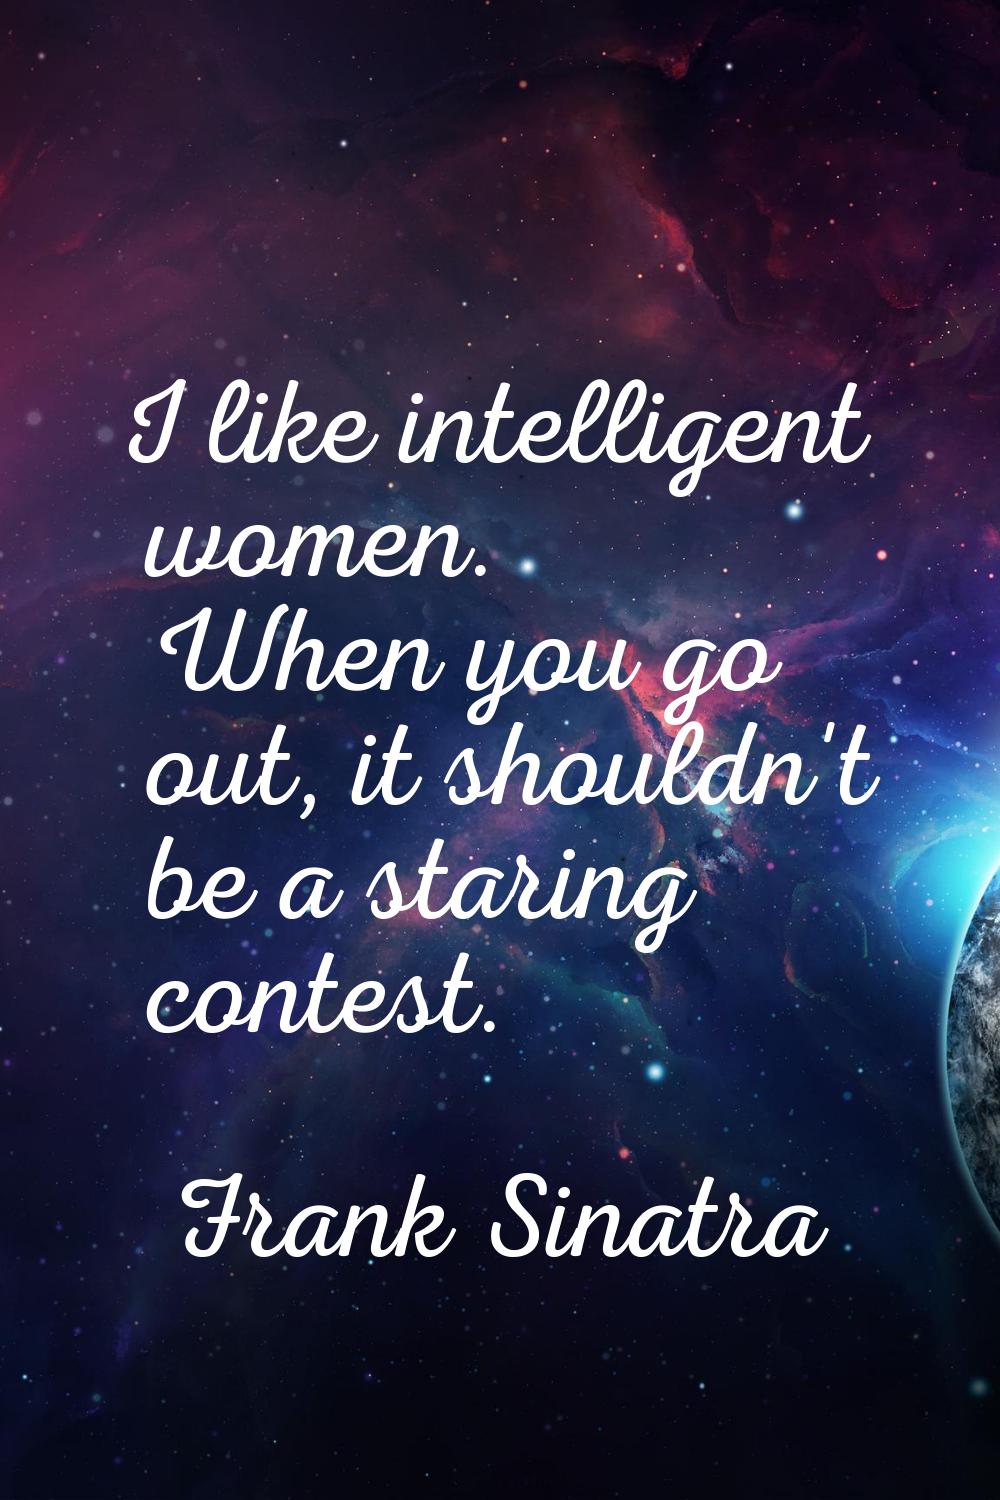 I like intelligent women. When you go out, it shouldn't be a staring contest.